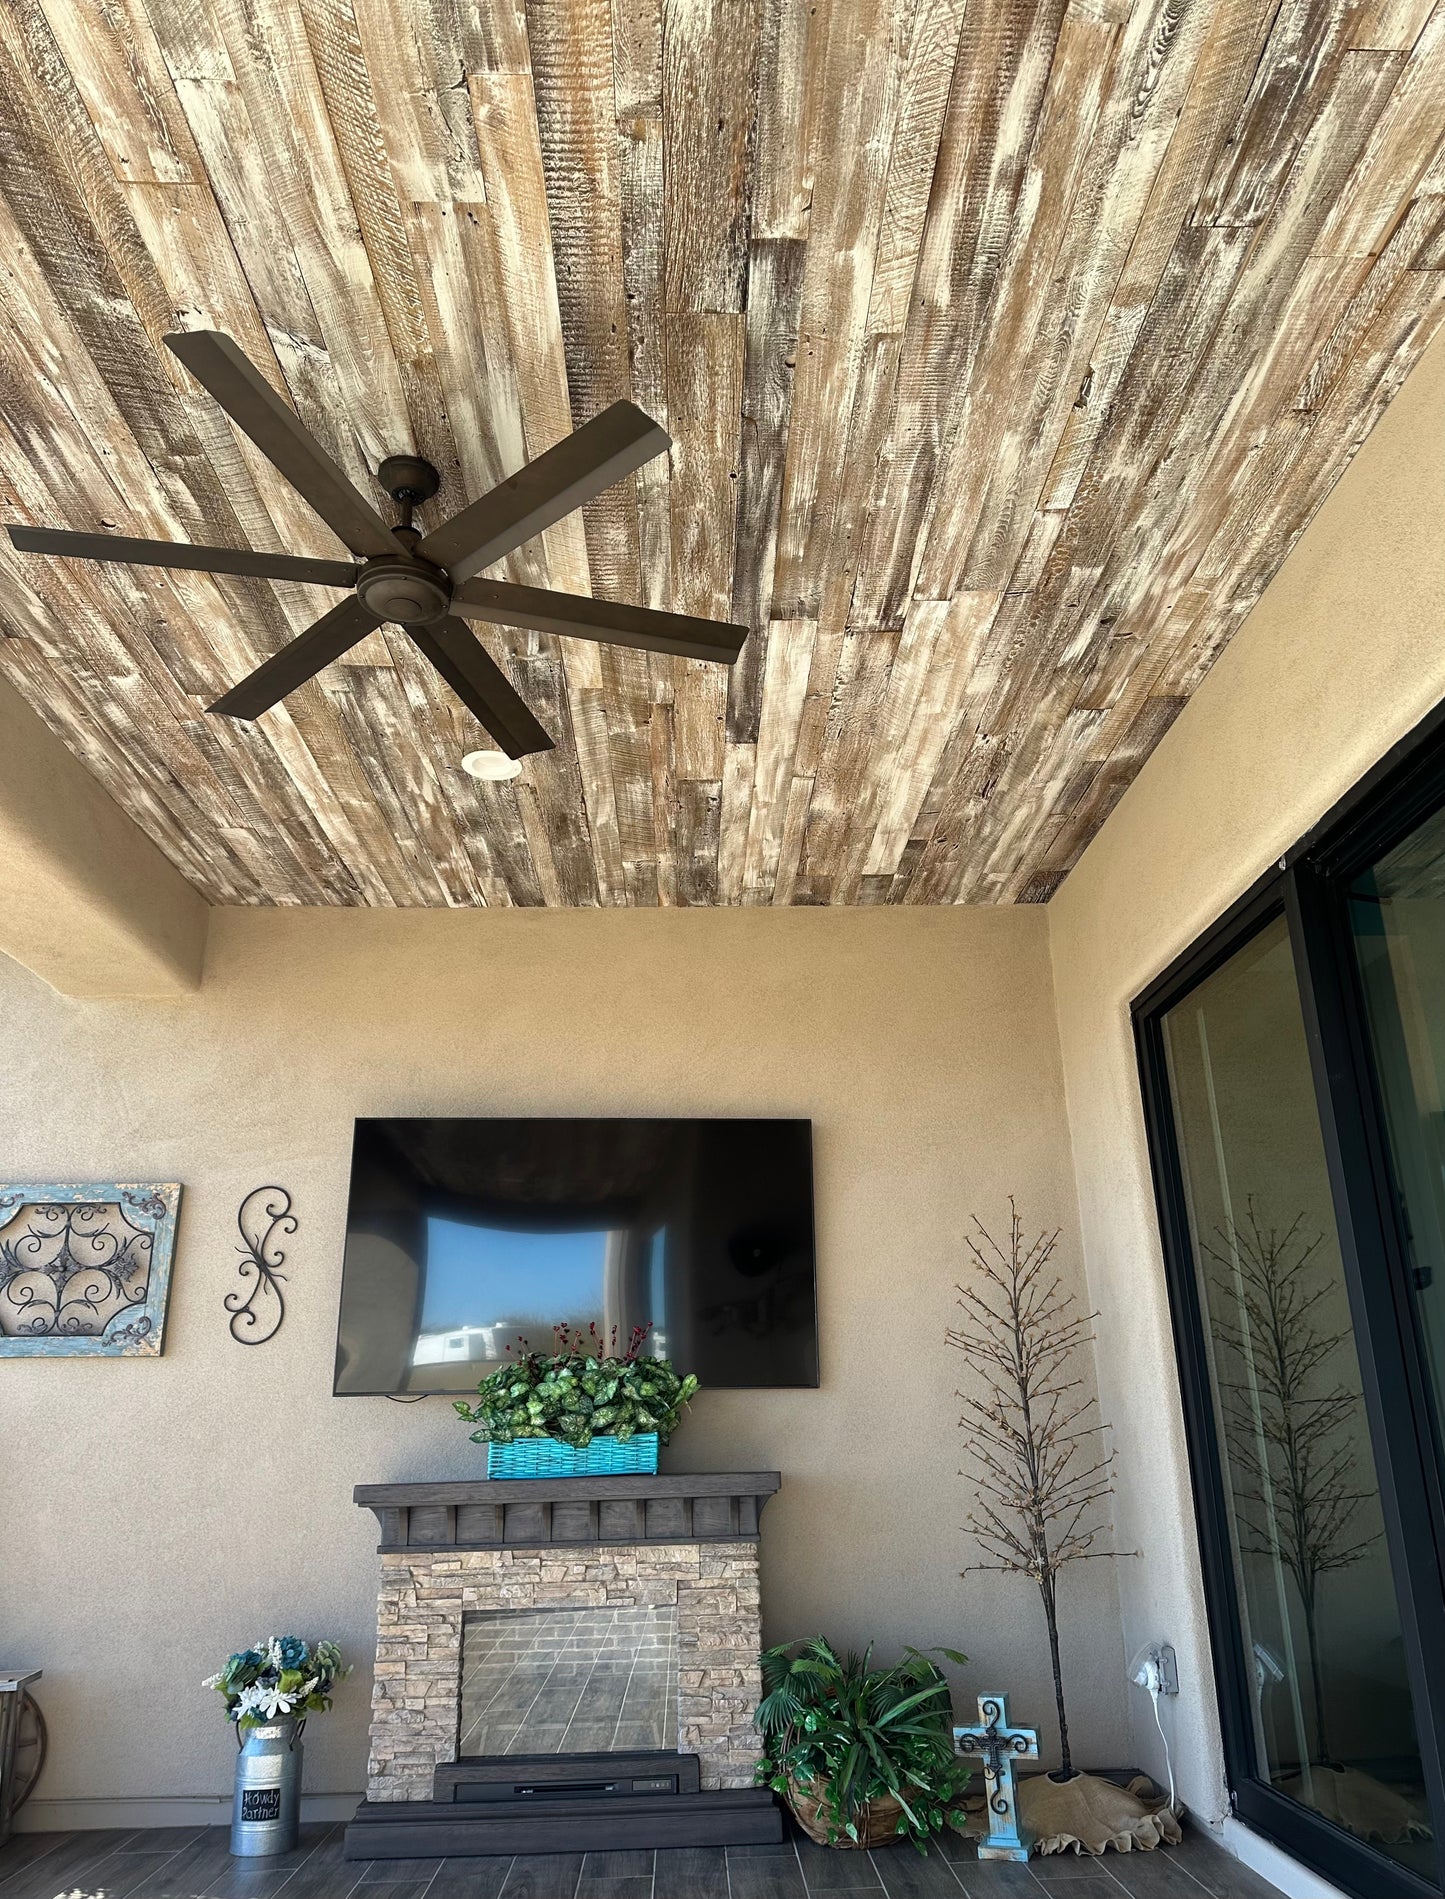 antique white reclaimed barnwood planks used on the ceiling of an outdoor terrace. Wood is brown with a white wash finish applied.